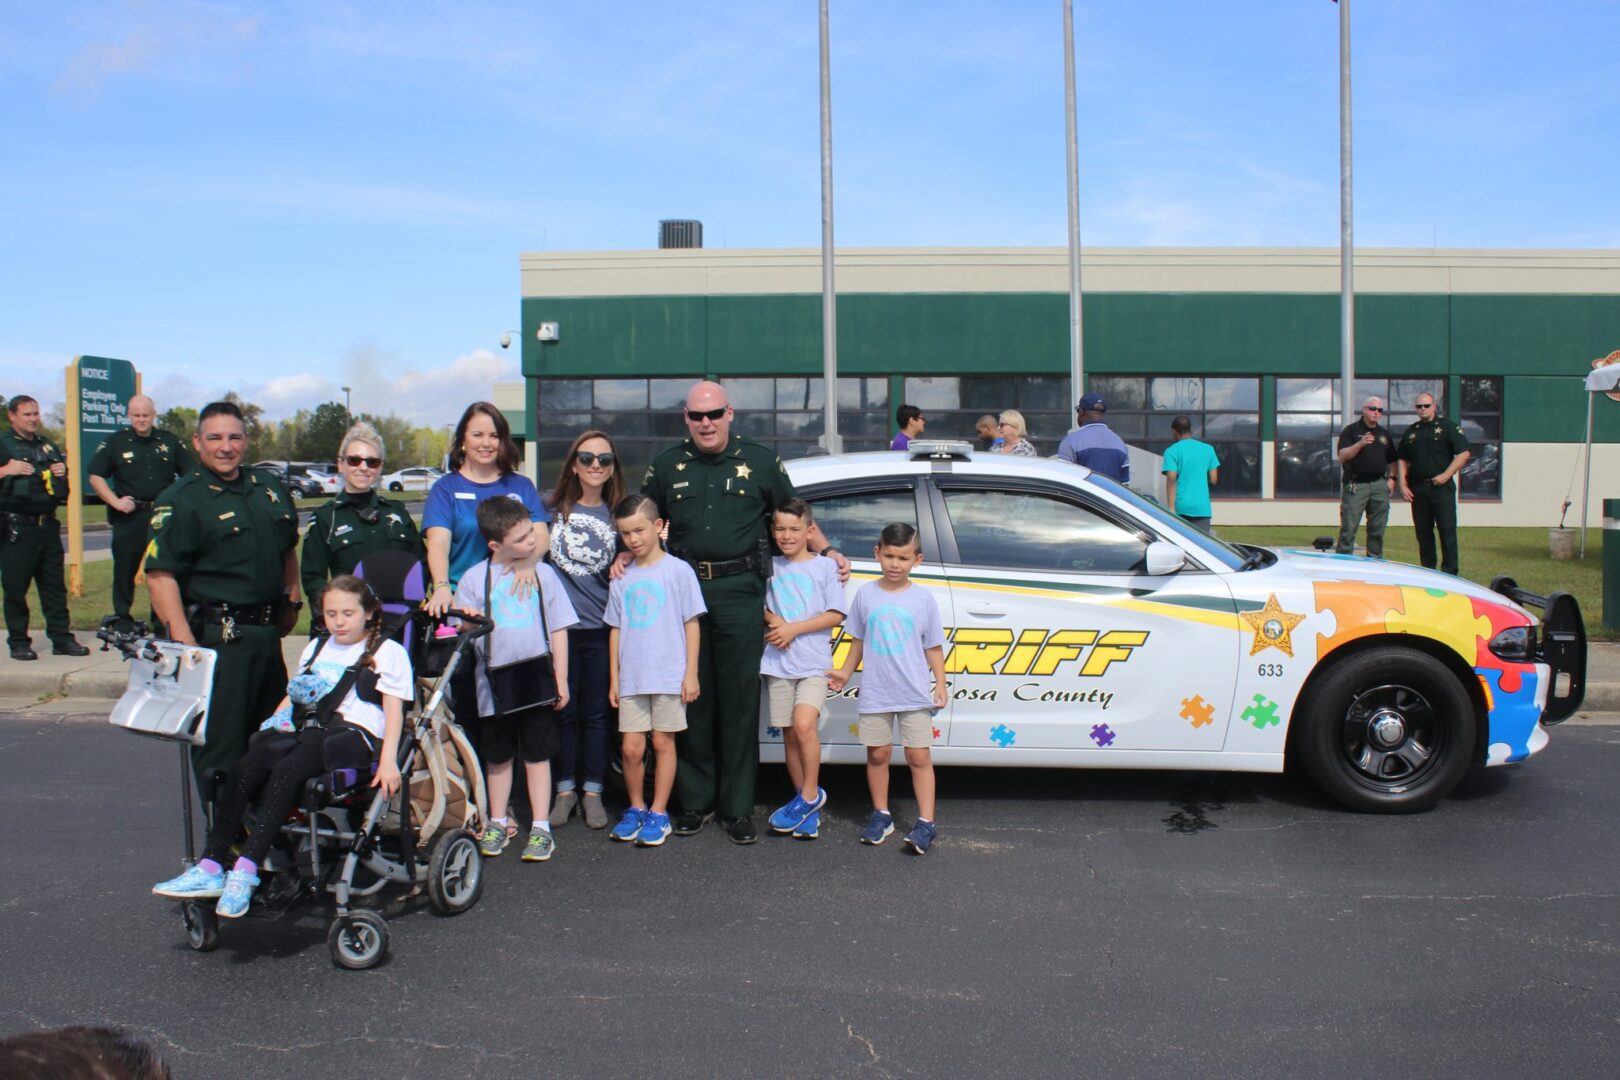 Group of people, including children and adults, posing with a sheriff's car at a community event.